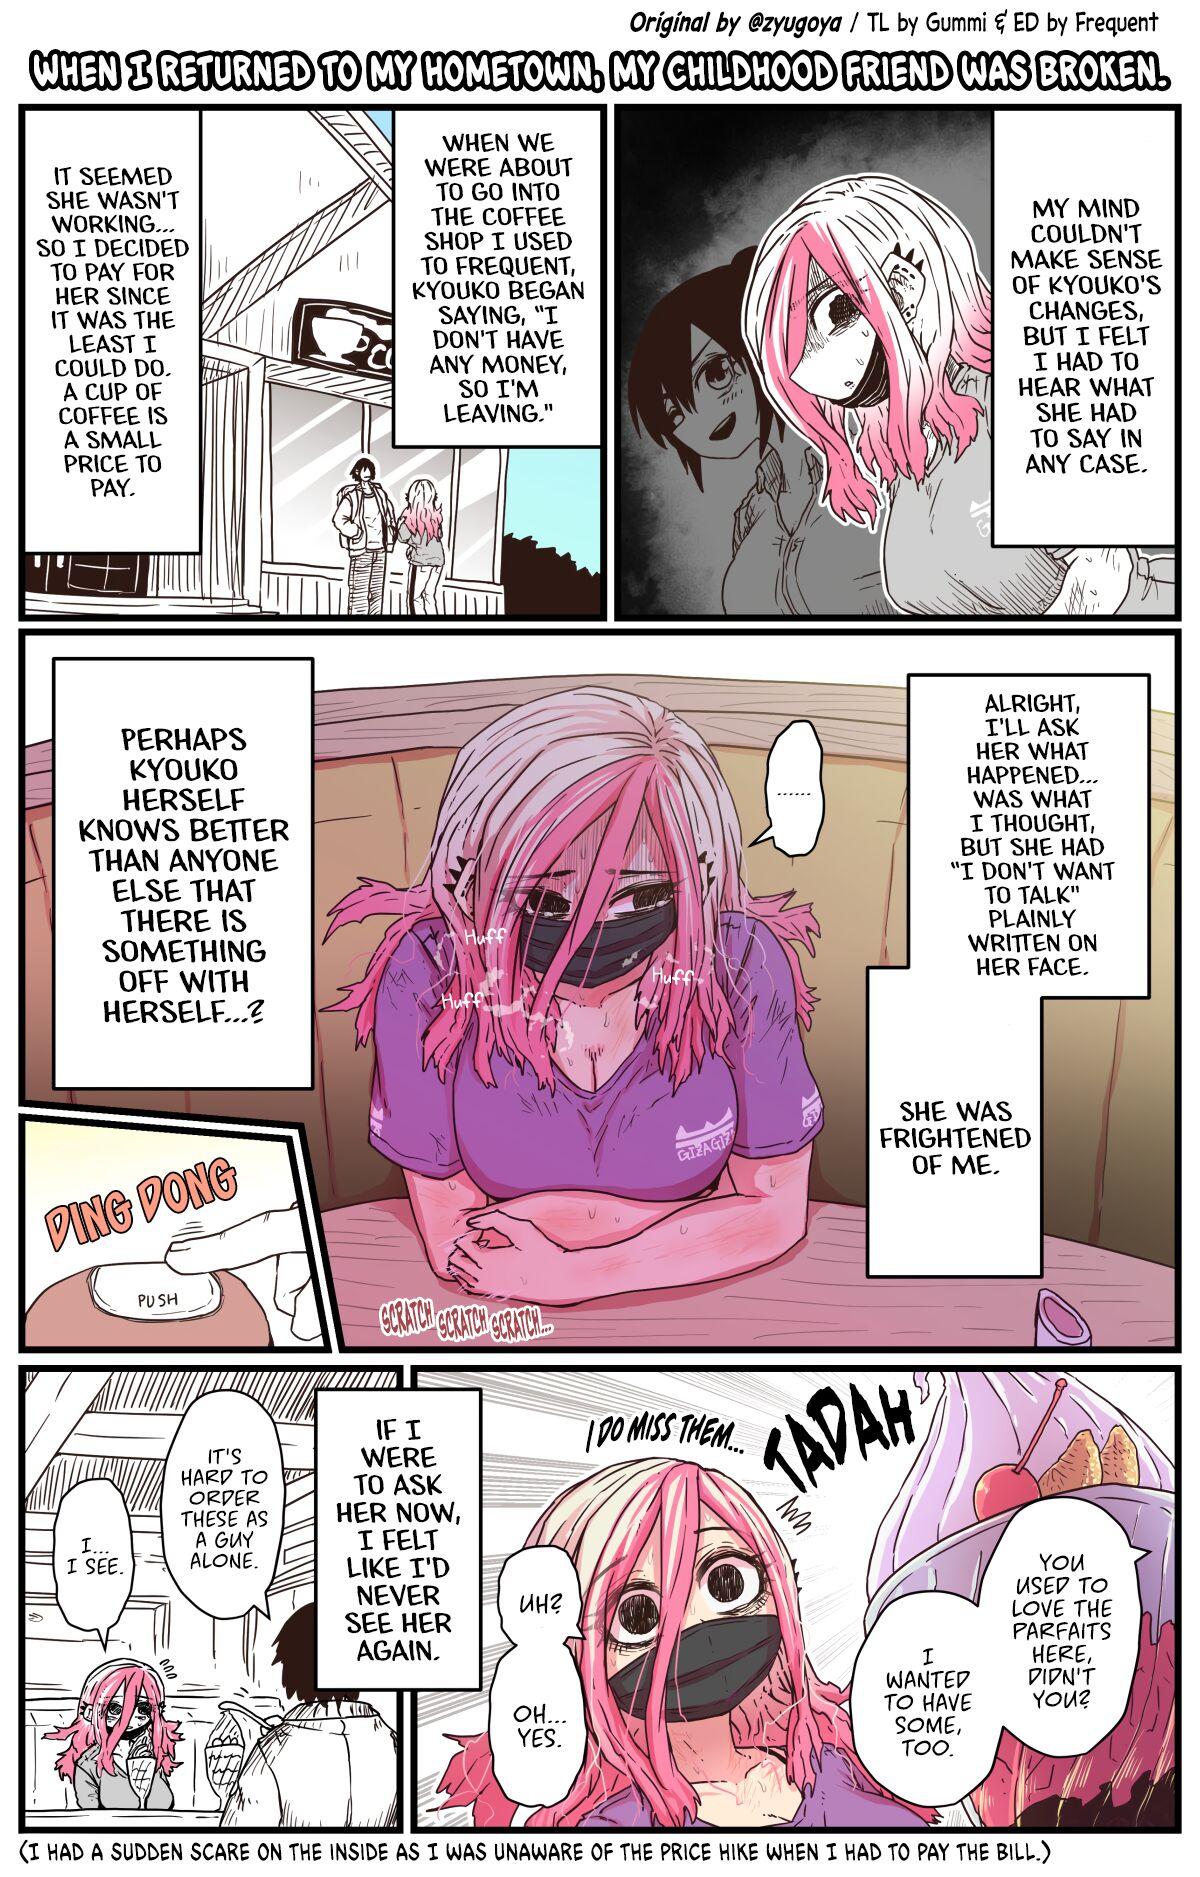 This When I Returned to My Hometown, My Childhood Friend was Broken - Original Big Booty - Page 4